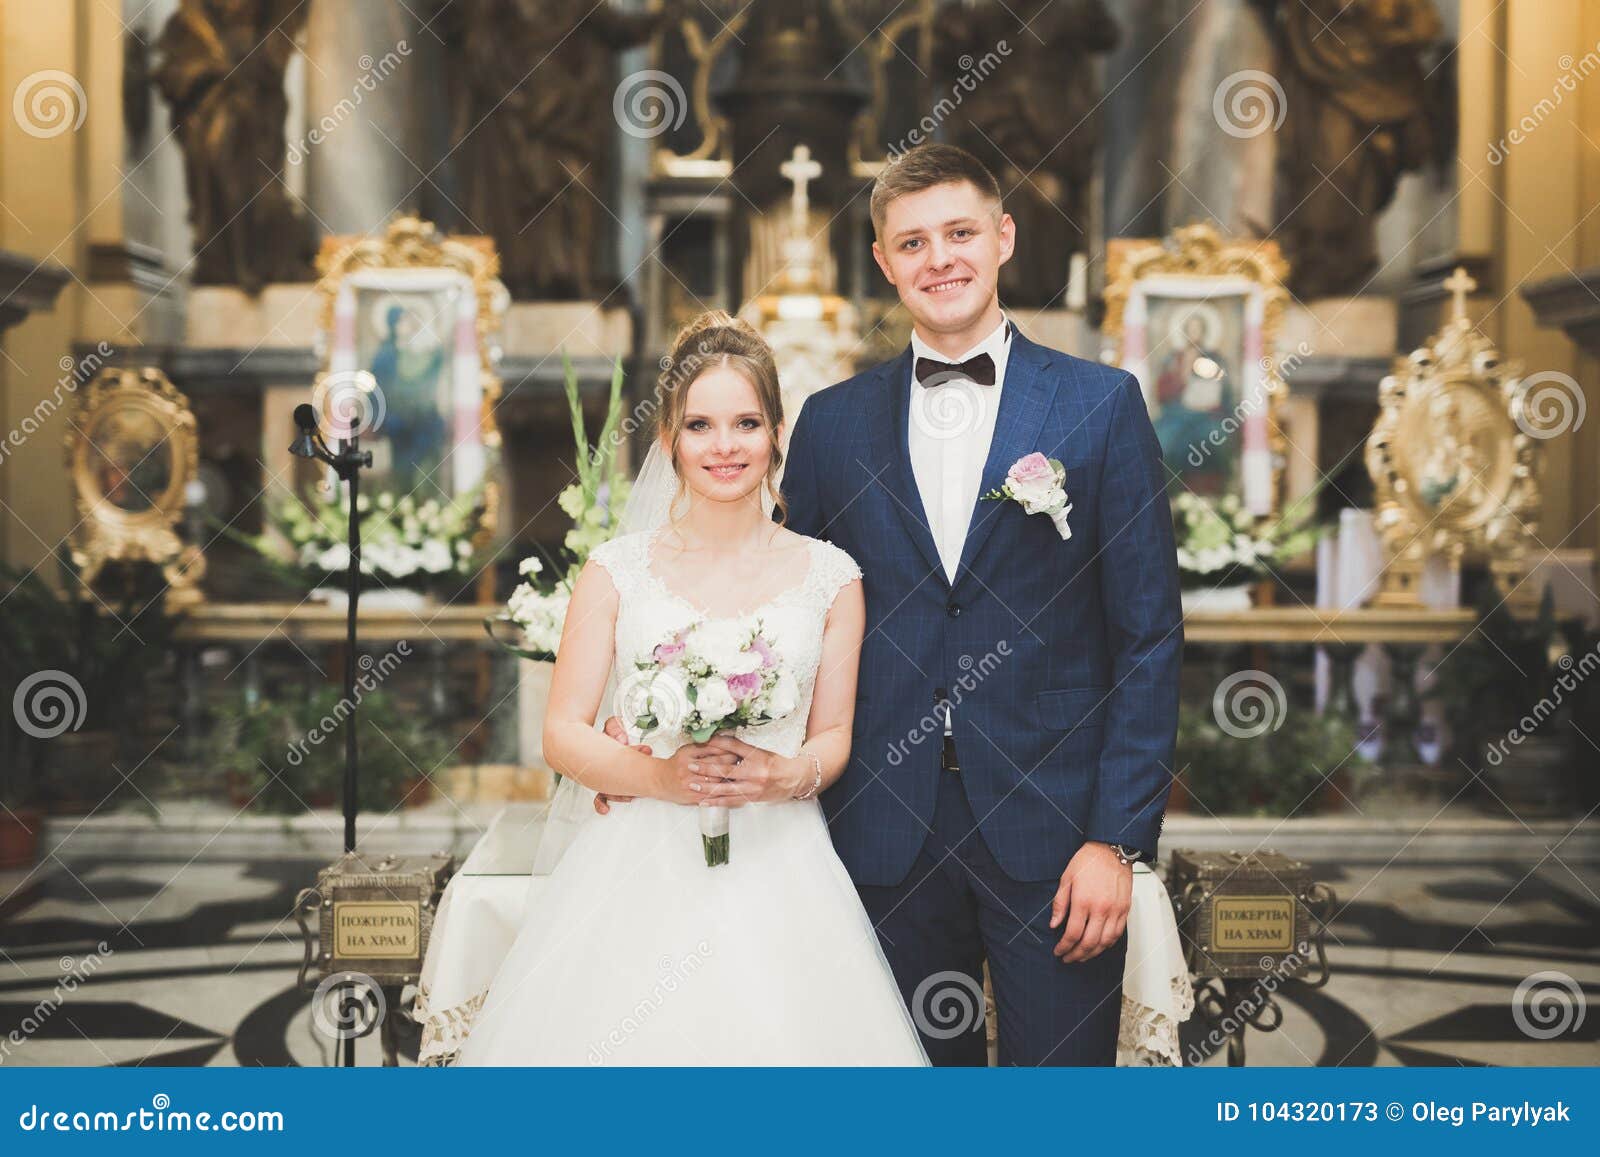 wedding couple bide and groom get married in a church